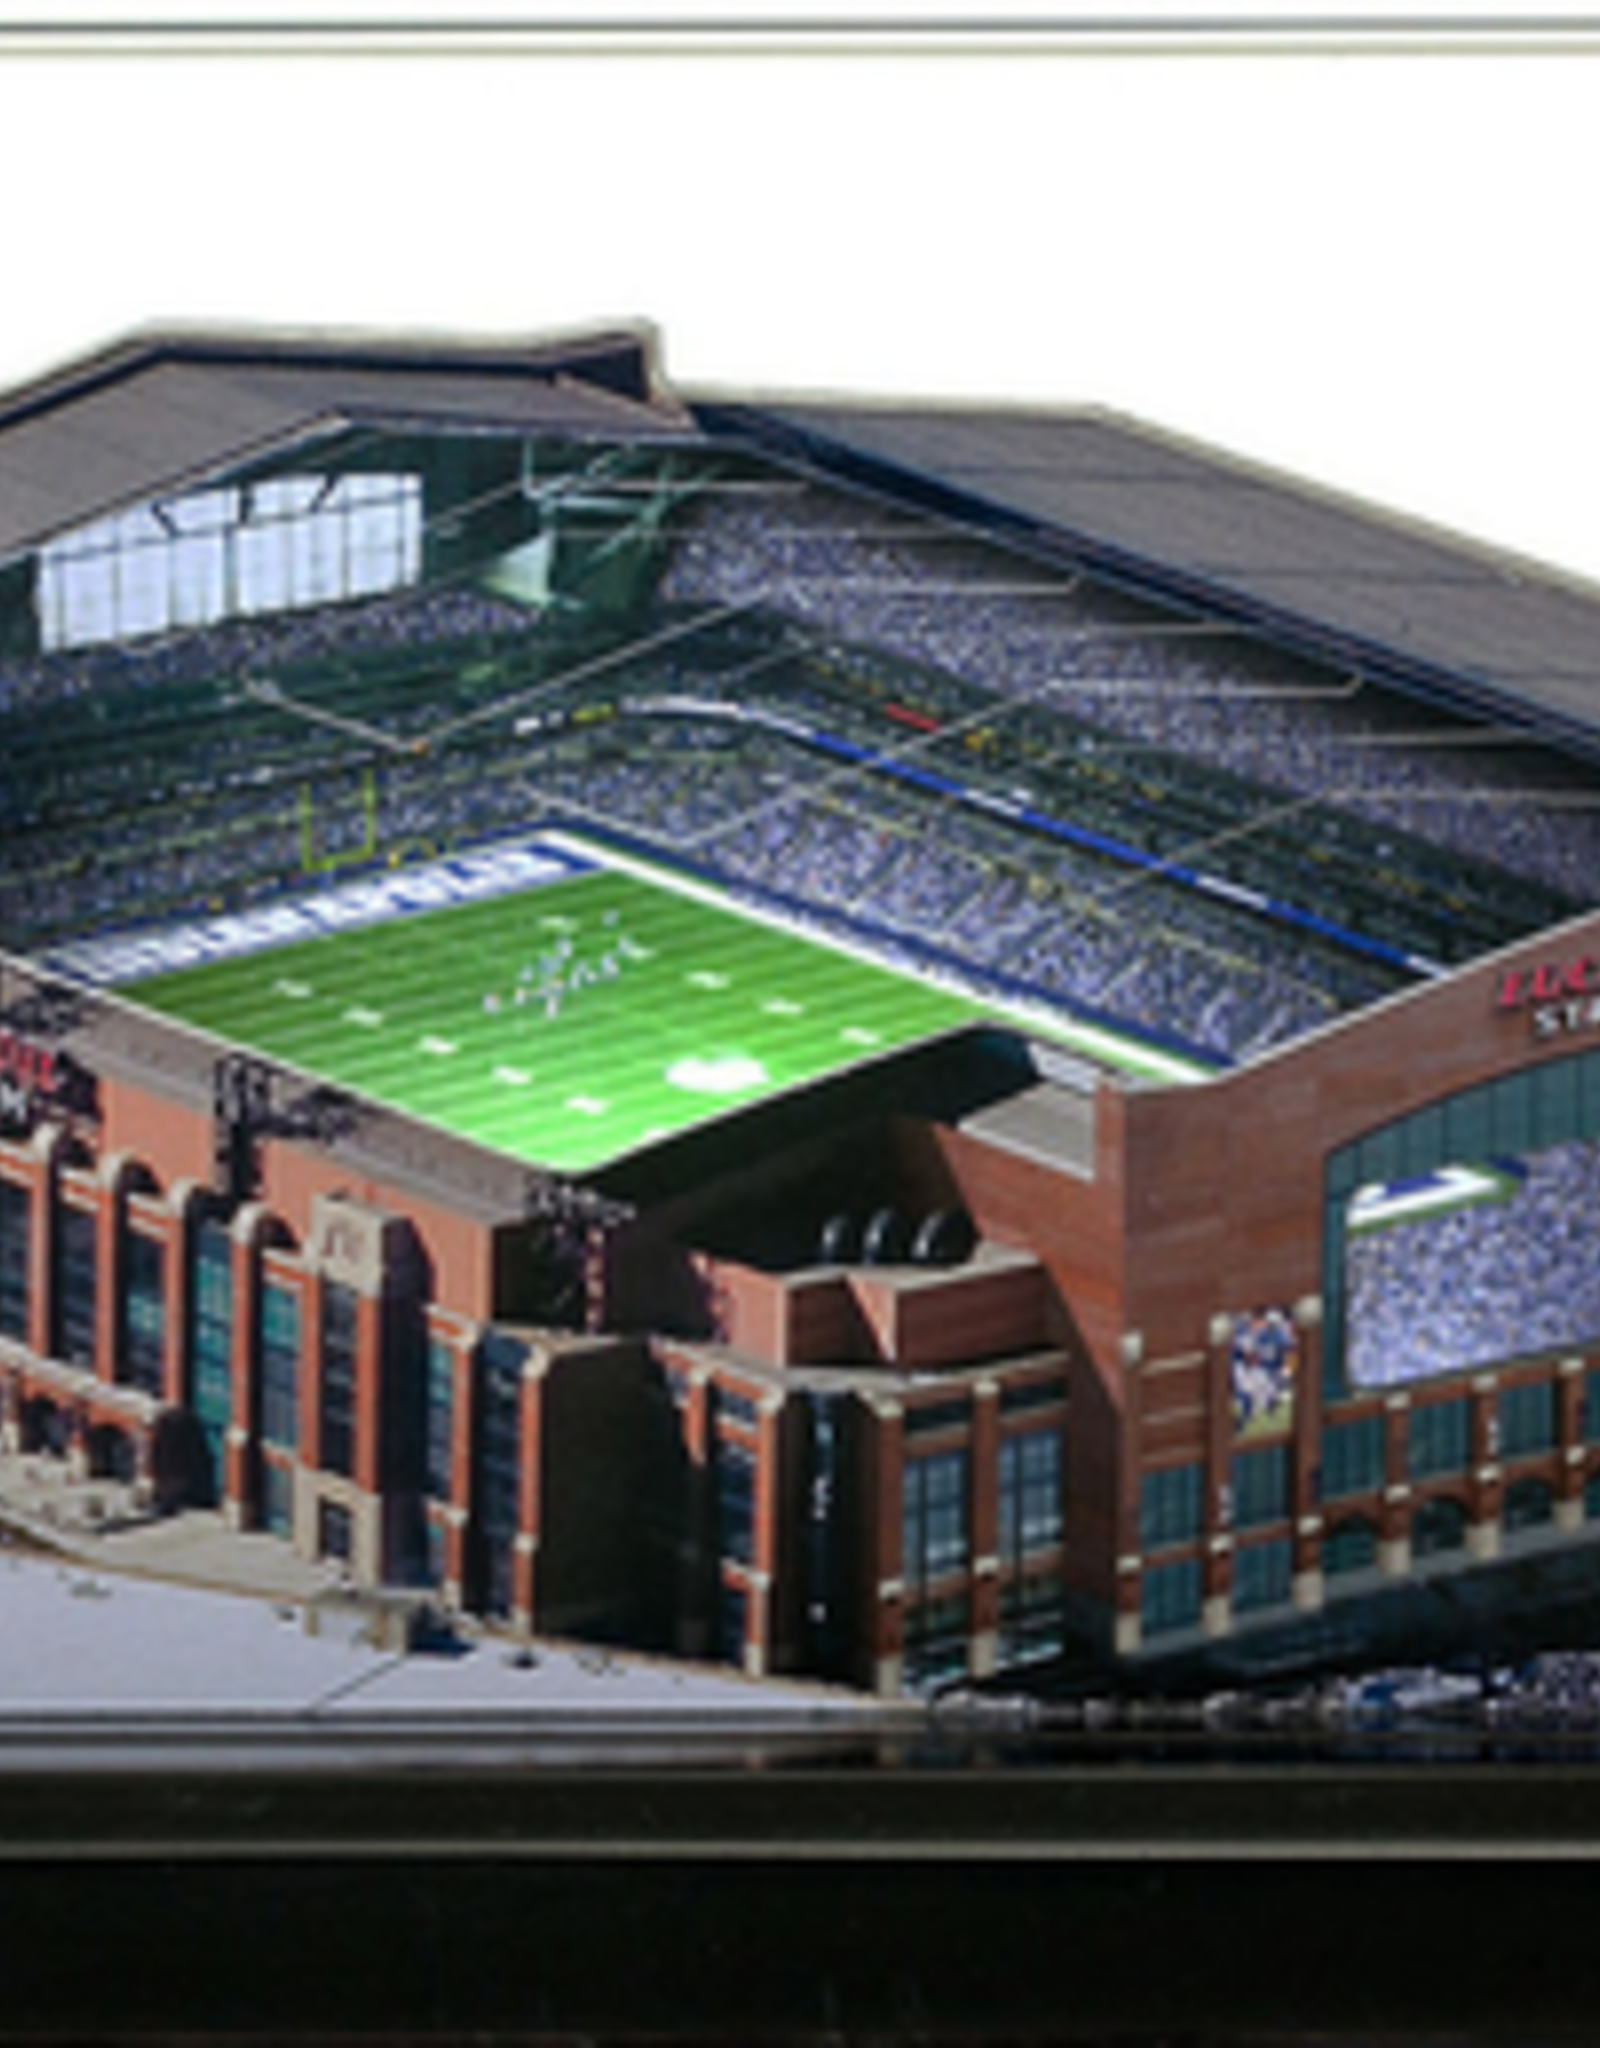 HOMEFIELDS Colts HomeField - Lucas Oil Stadium 13IN